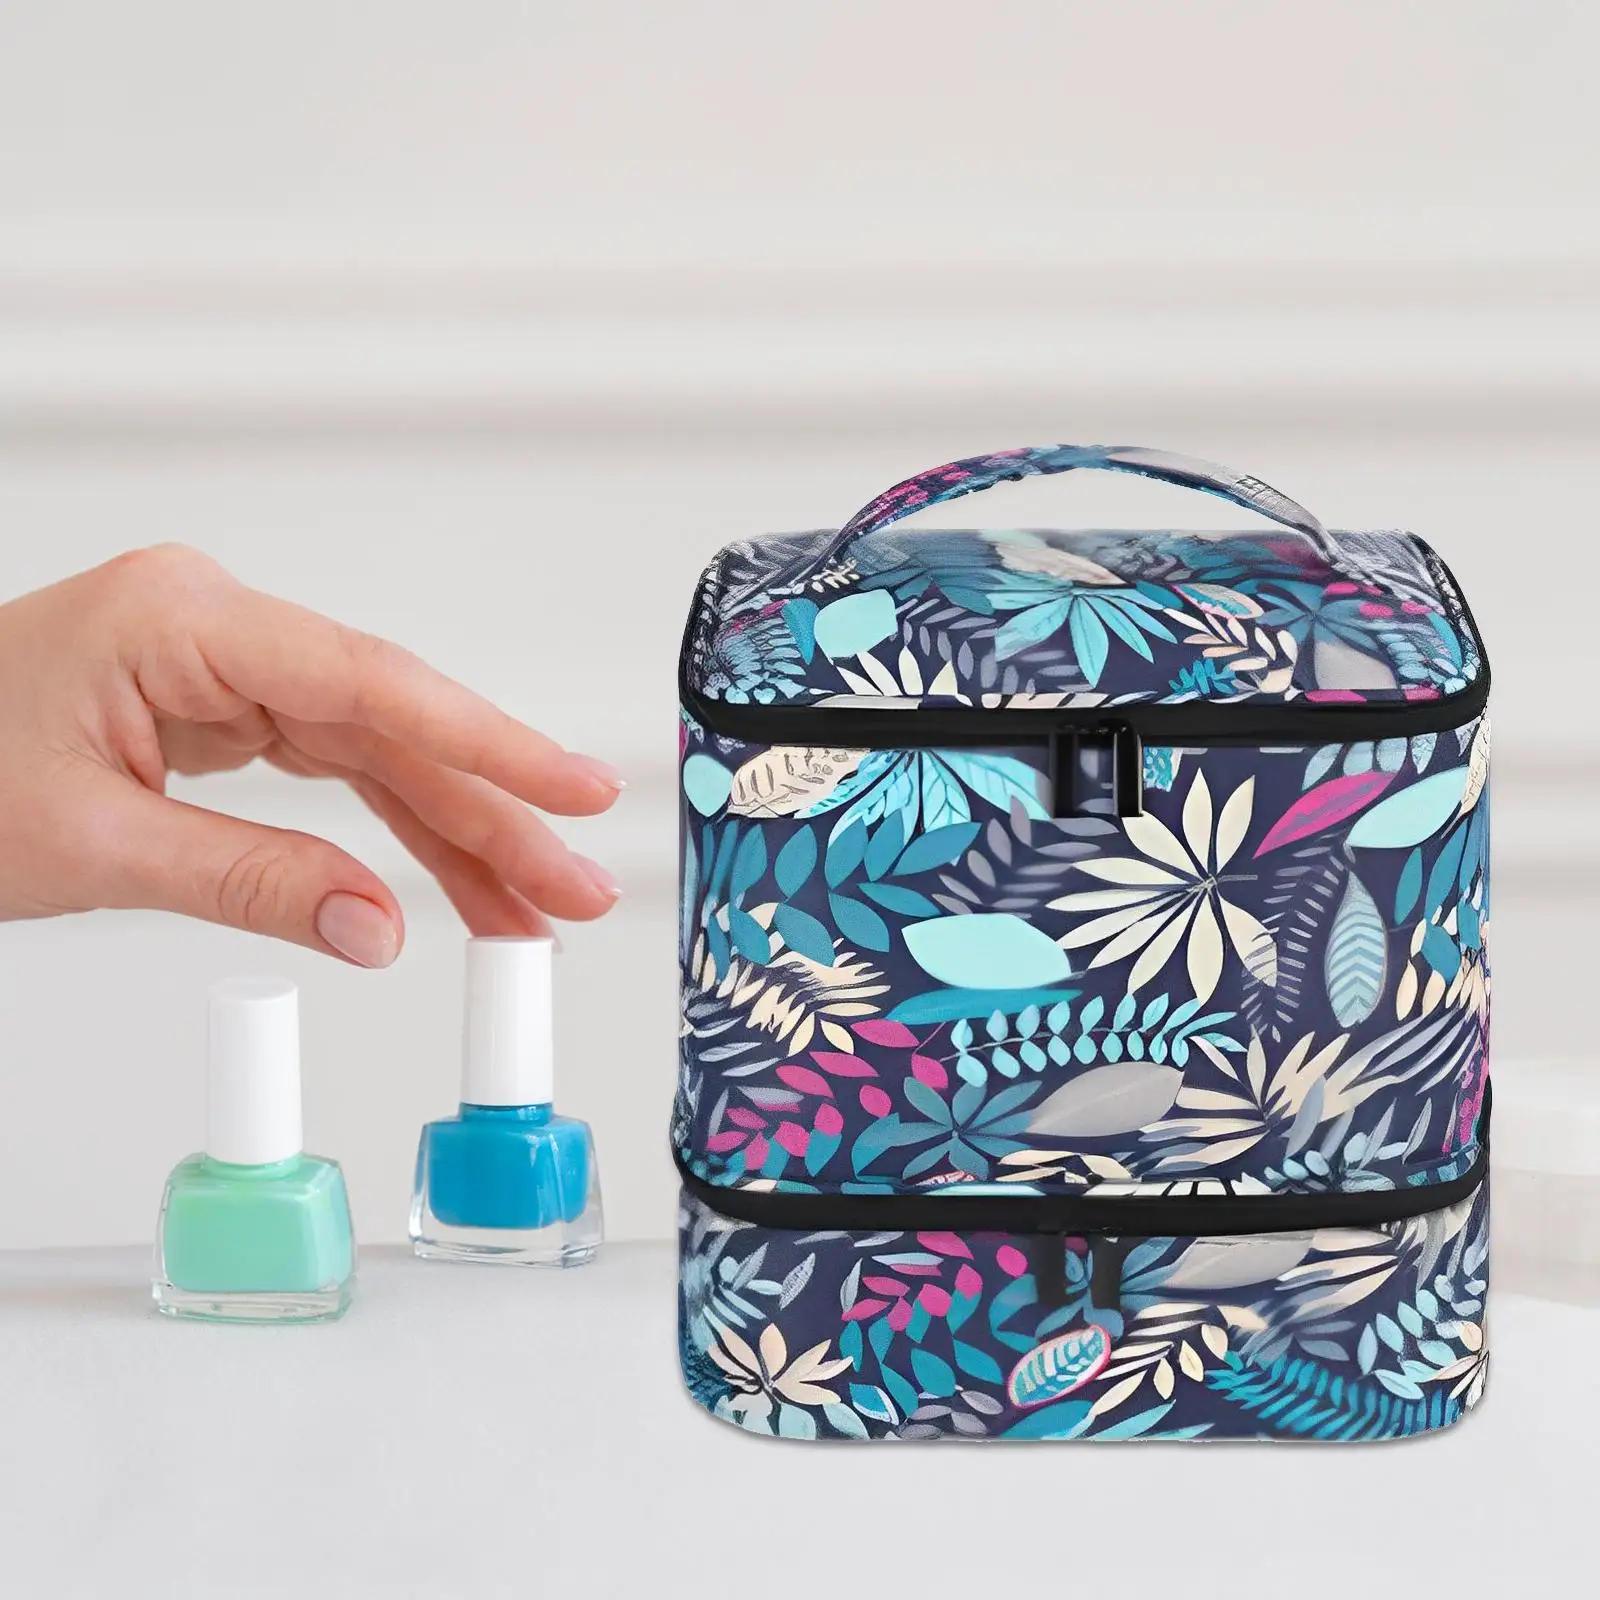 Nail Polish Bag Holds 30 Bottles with Handle Nail Dryer Case Pockets for Travel Lipstick Manicure Accessories Essential Oil Lady